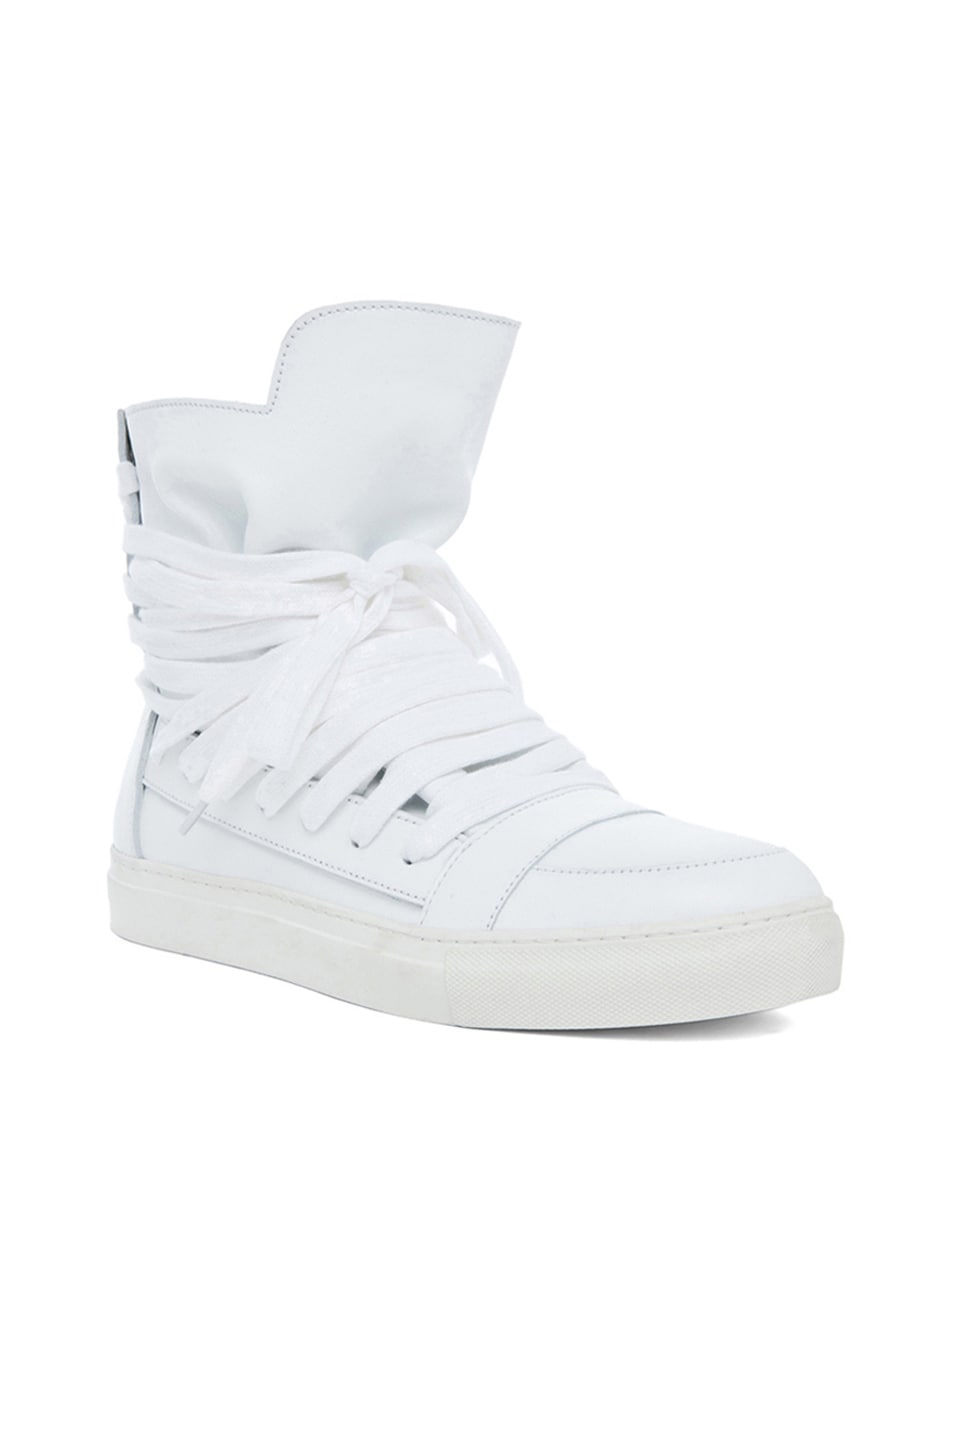 Image 1 of Kris Van Assche Multi Laces Calfskin Leather Sneakers in White